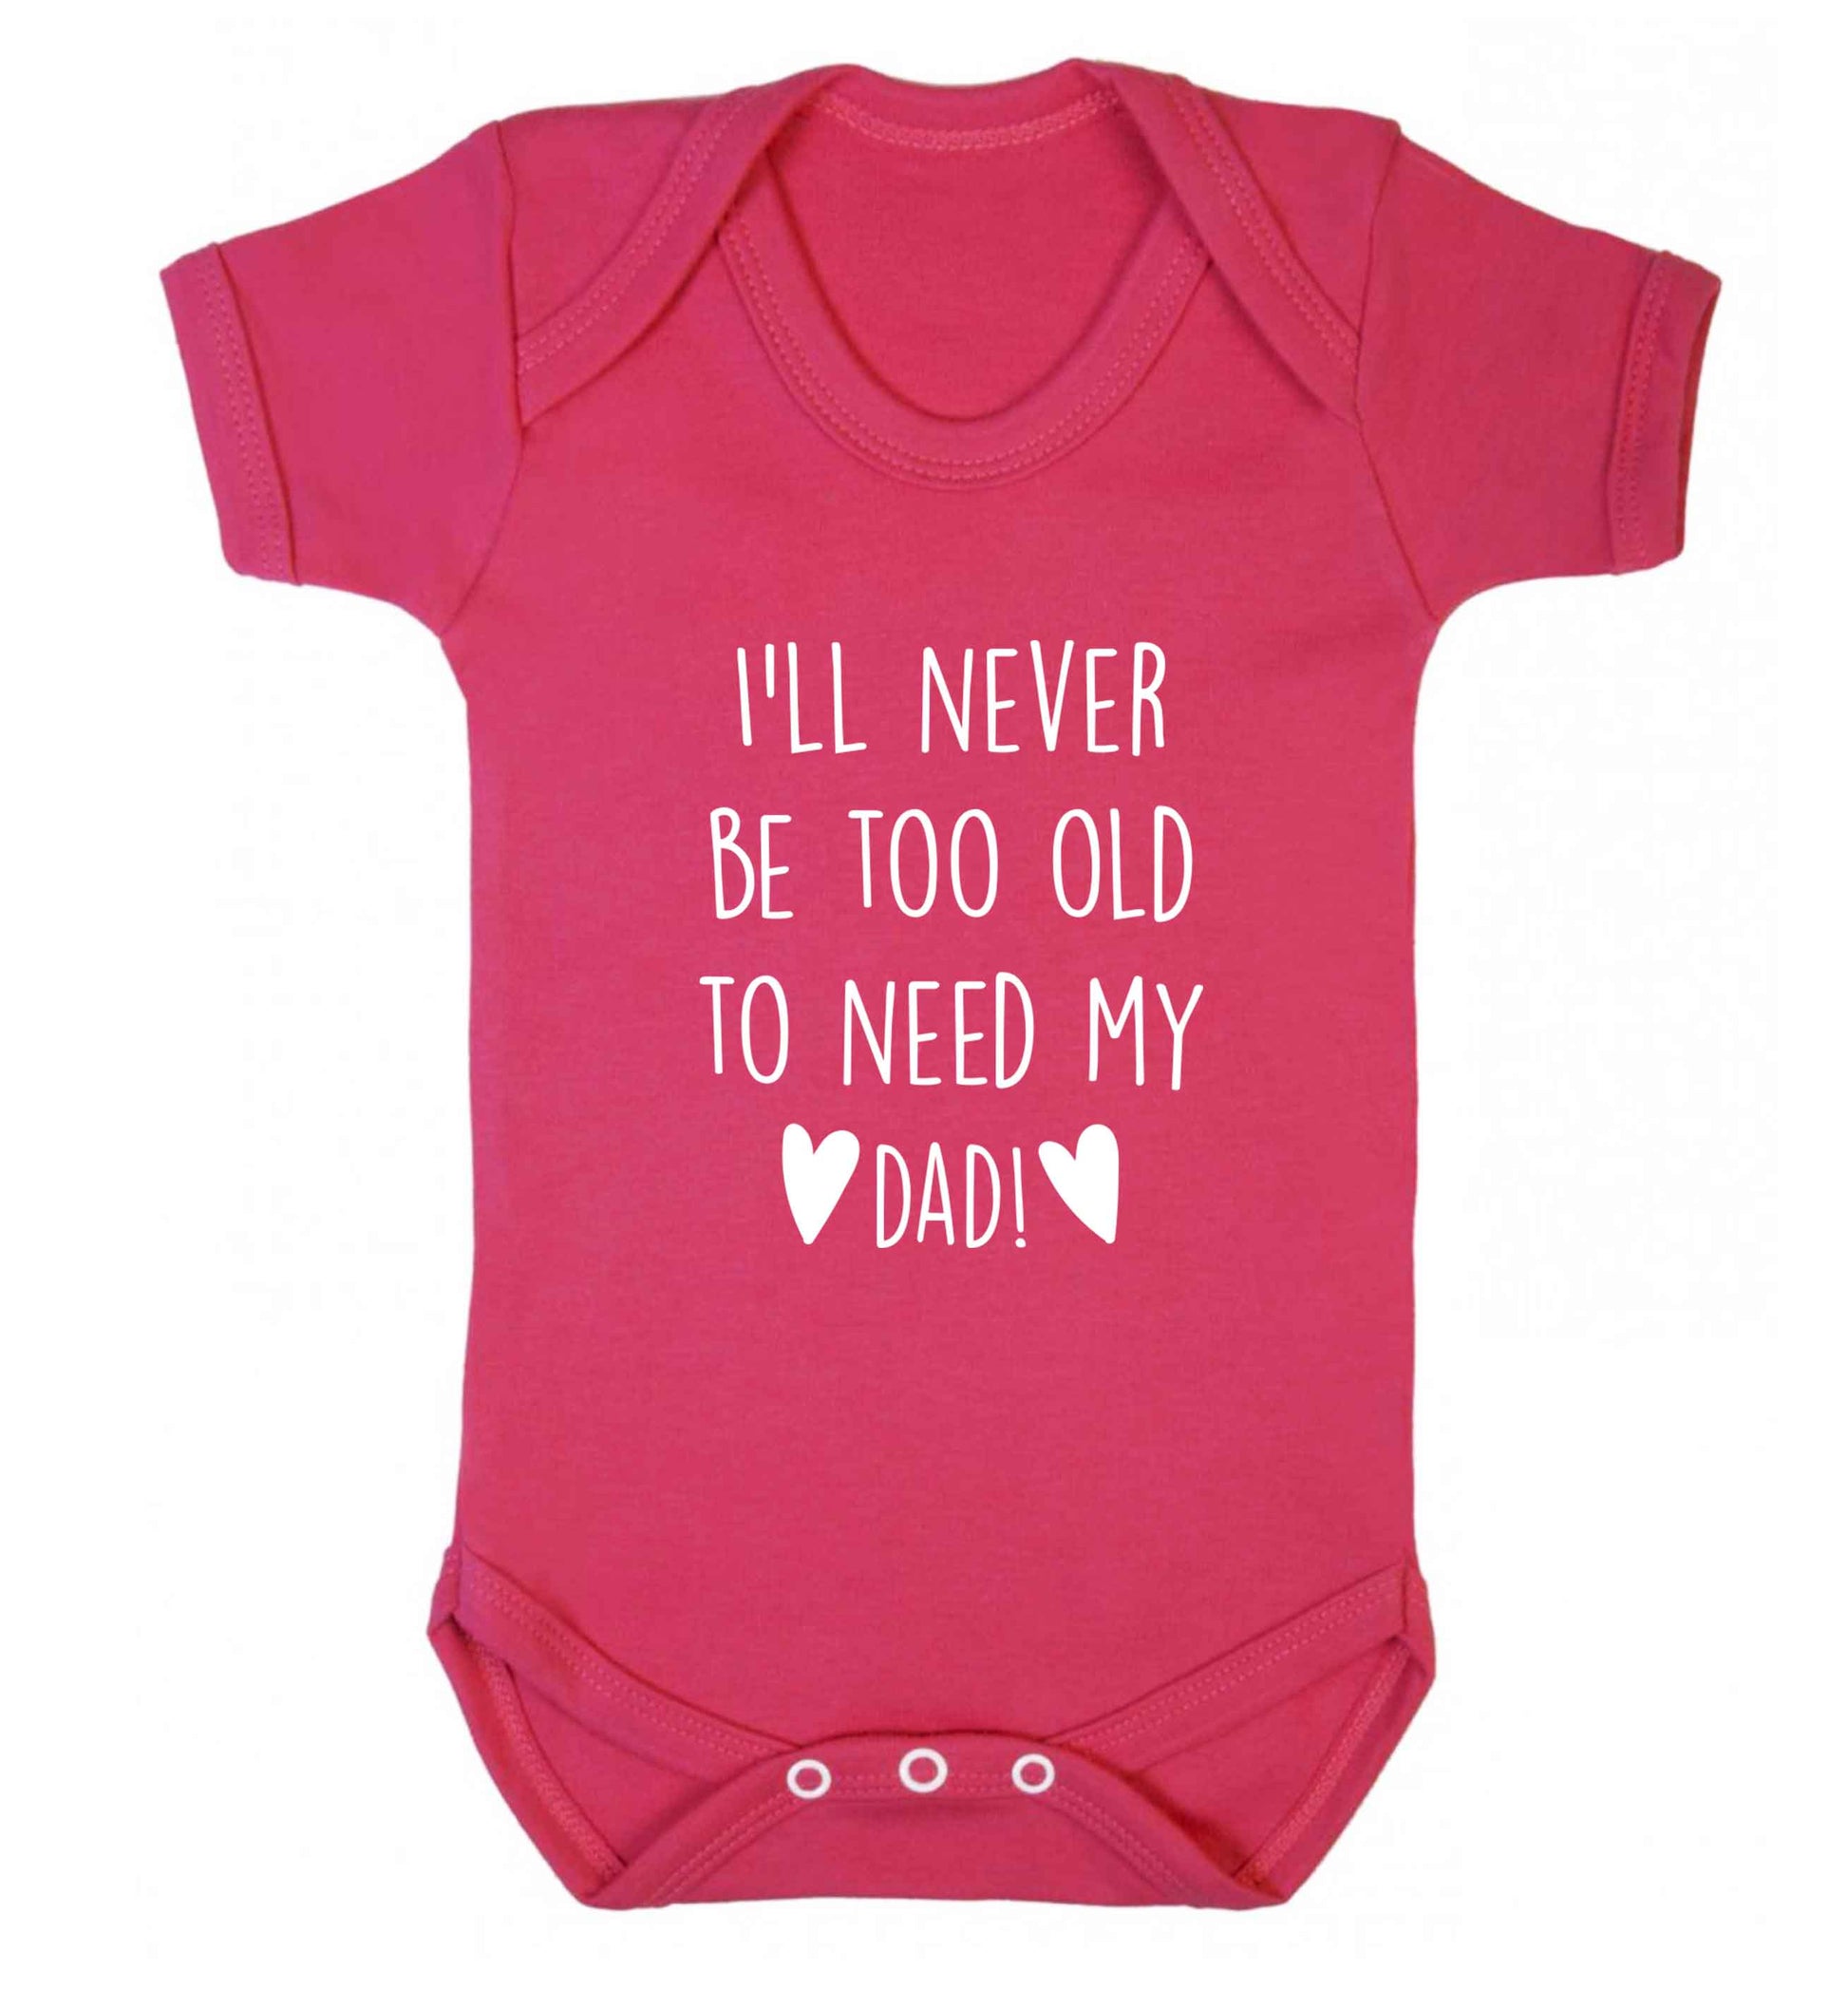 I'll never be too old to need my dad baby vest dark pink 18-24 months